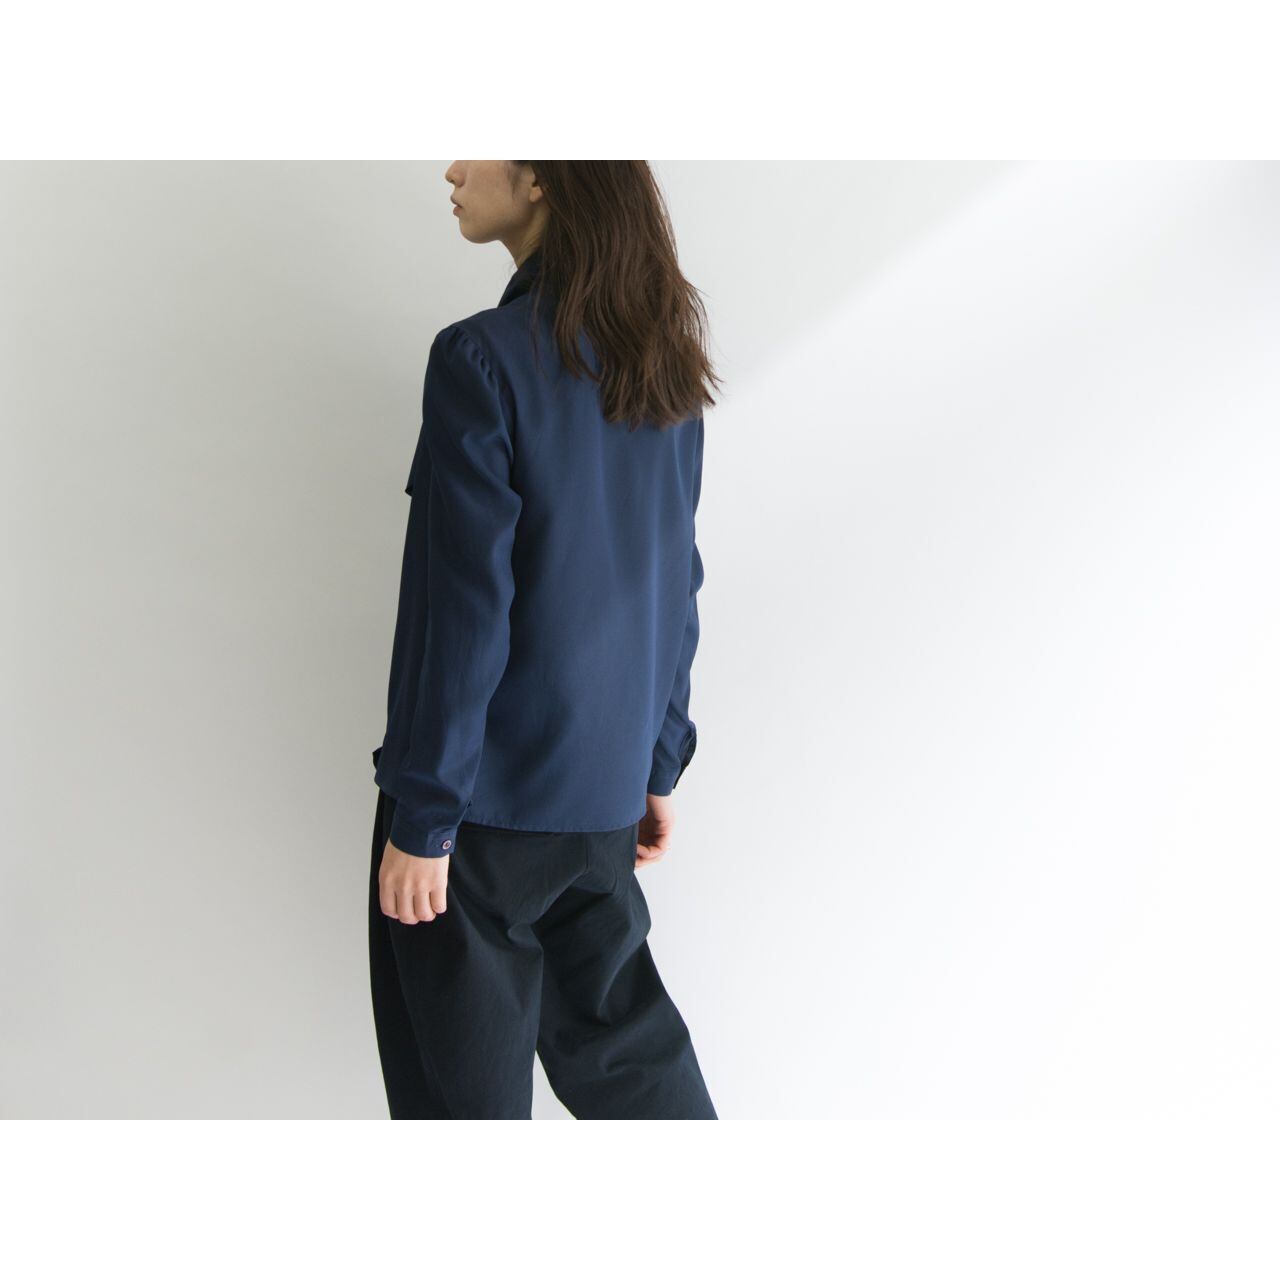 【Made in Italy】Tie collar pleated blouse（イタリア製 タイカラープリーツブラウス）4a